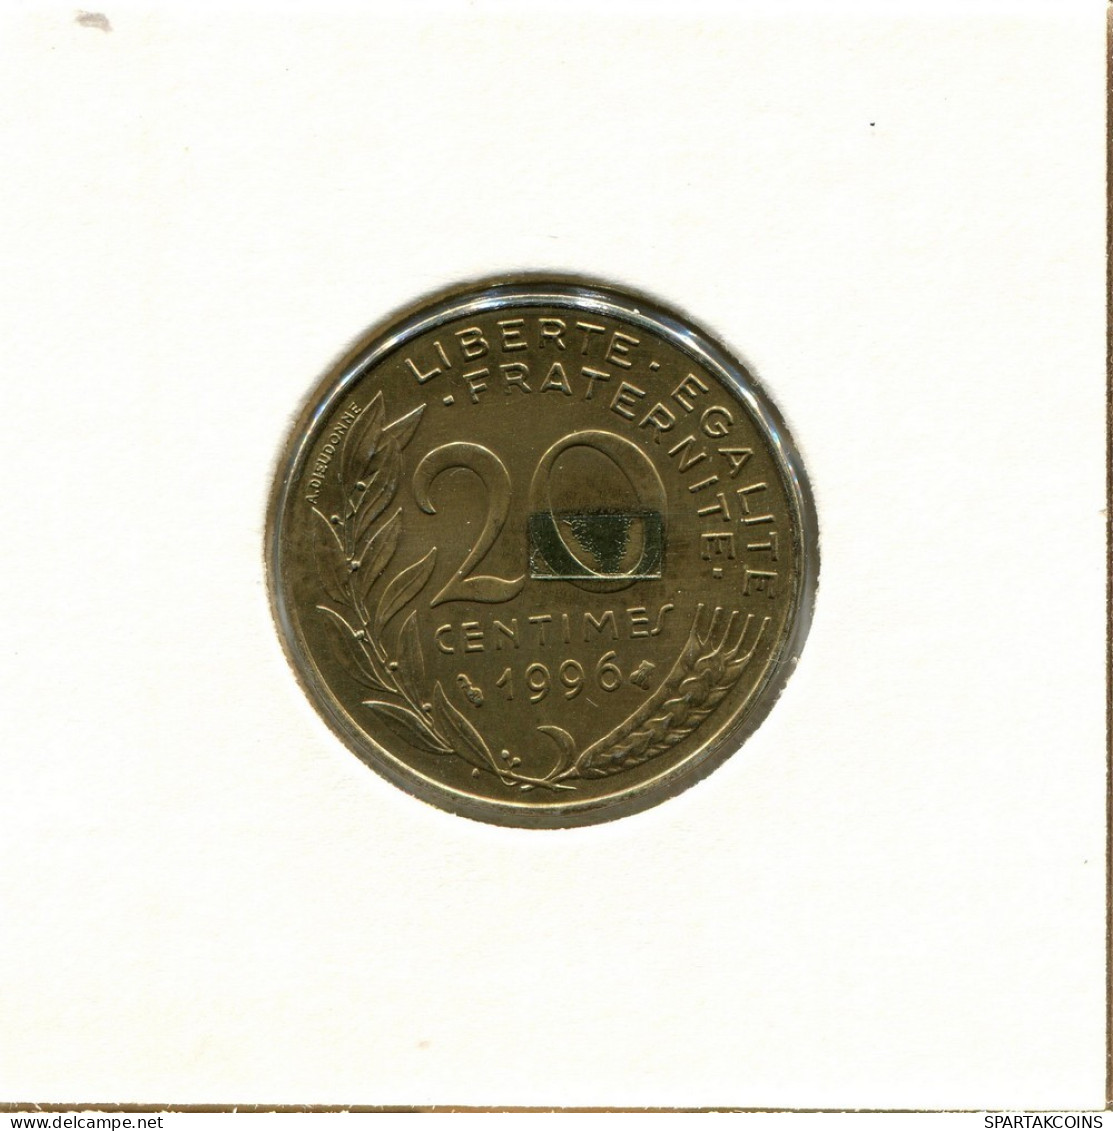 20 CENTIMES 1996 FRANCE Coin #BB512.U.A - 20 Centimes